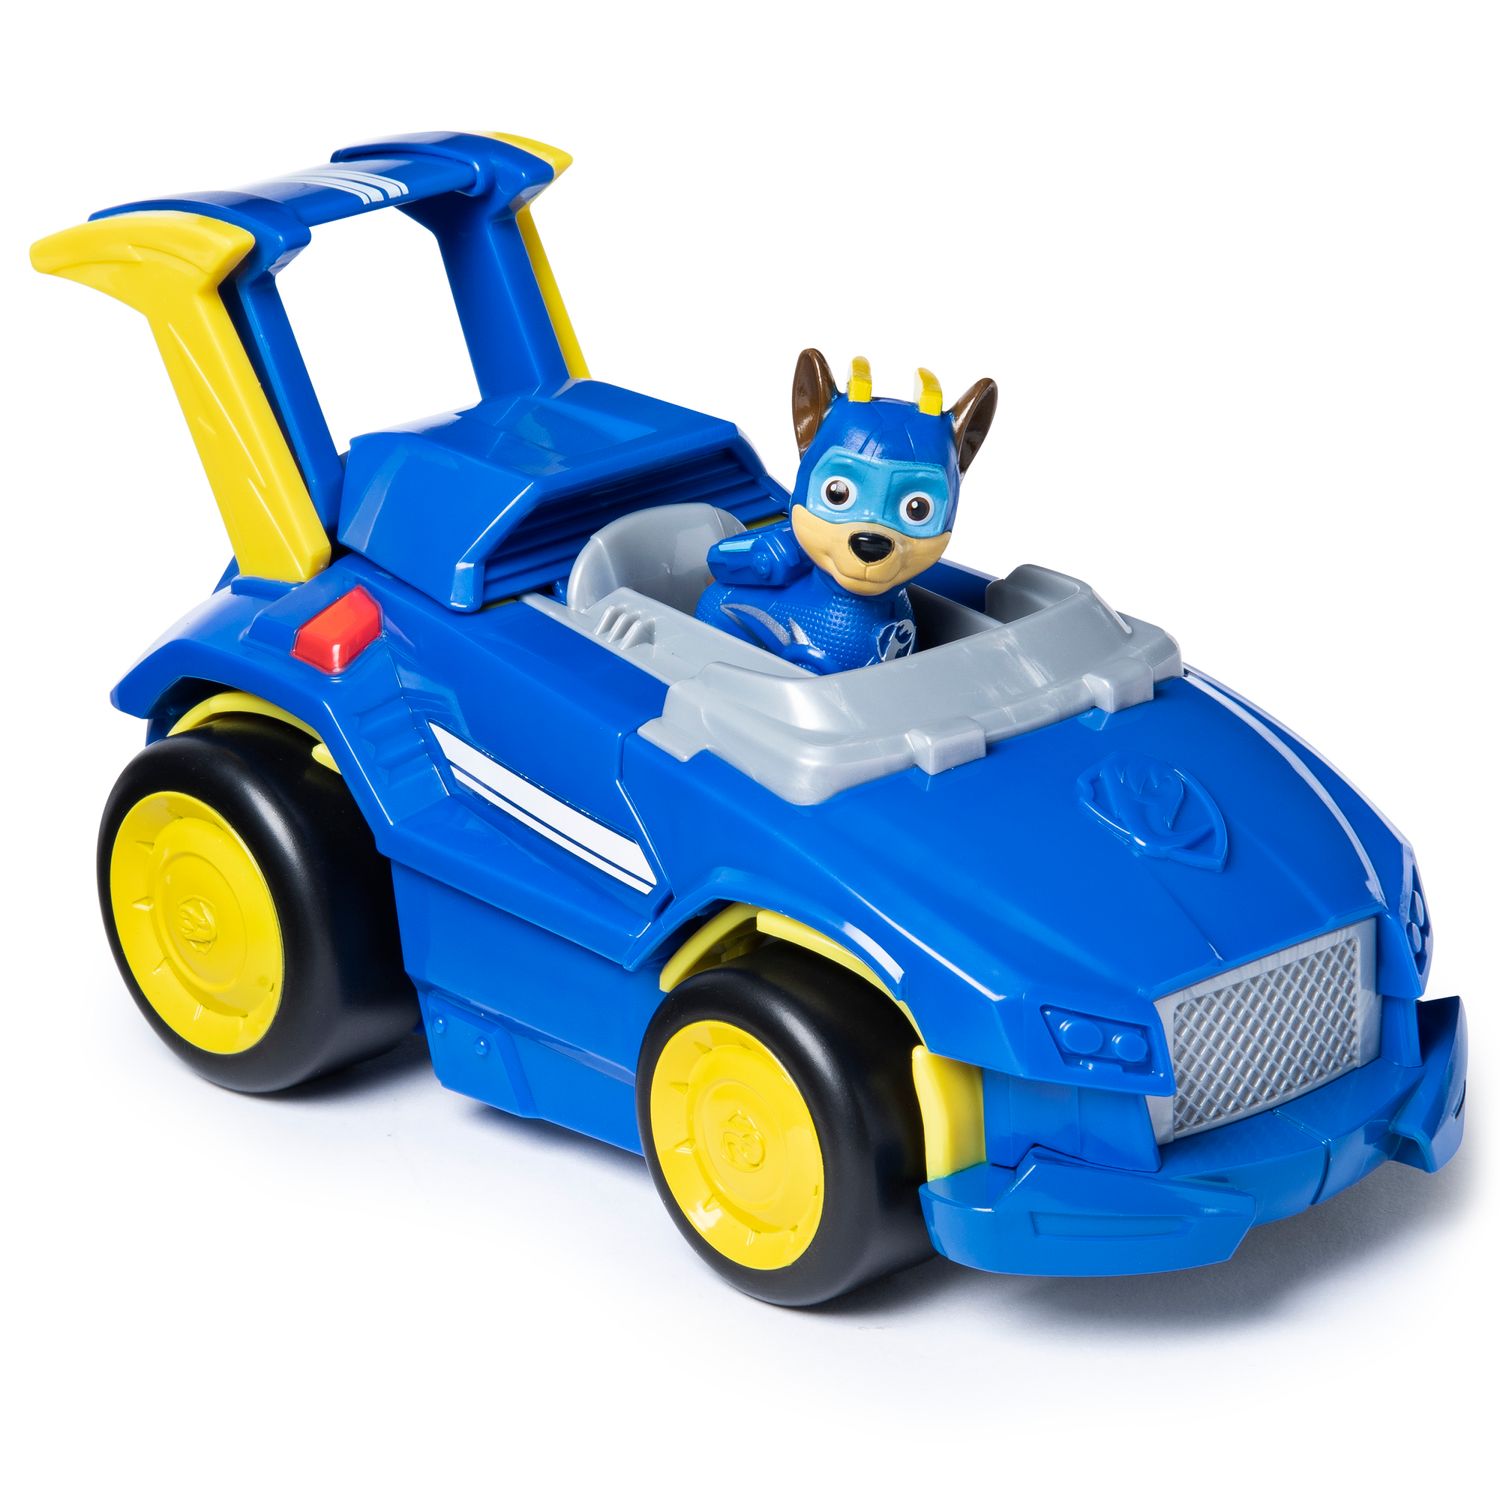 Nickelodeon KT1481WMDTR Paw Patrol Chase Toddler Ride-On Blue for sale online 